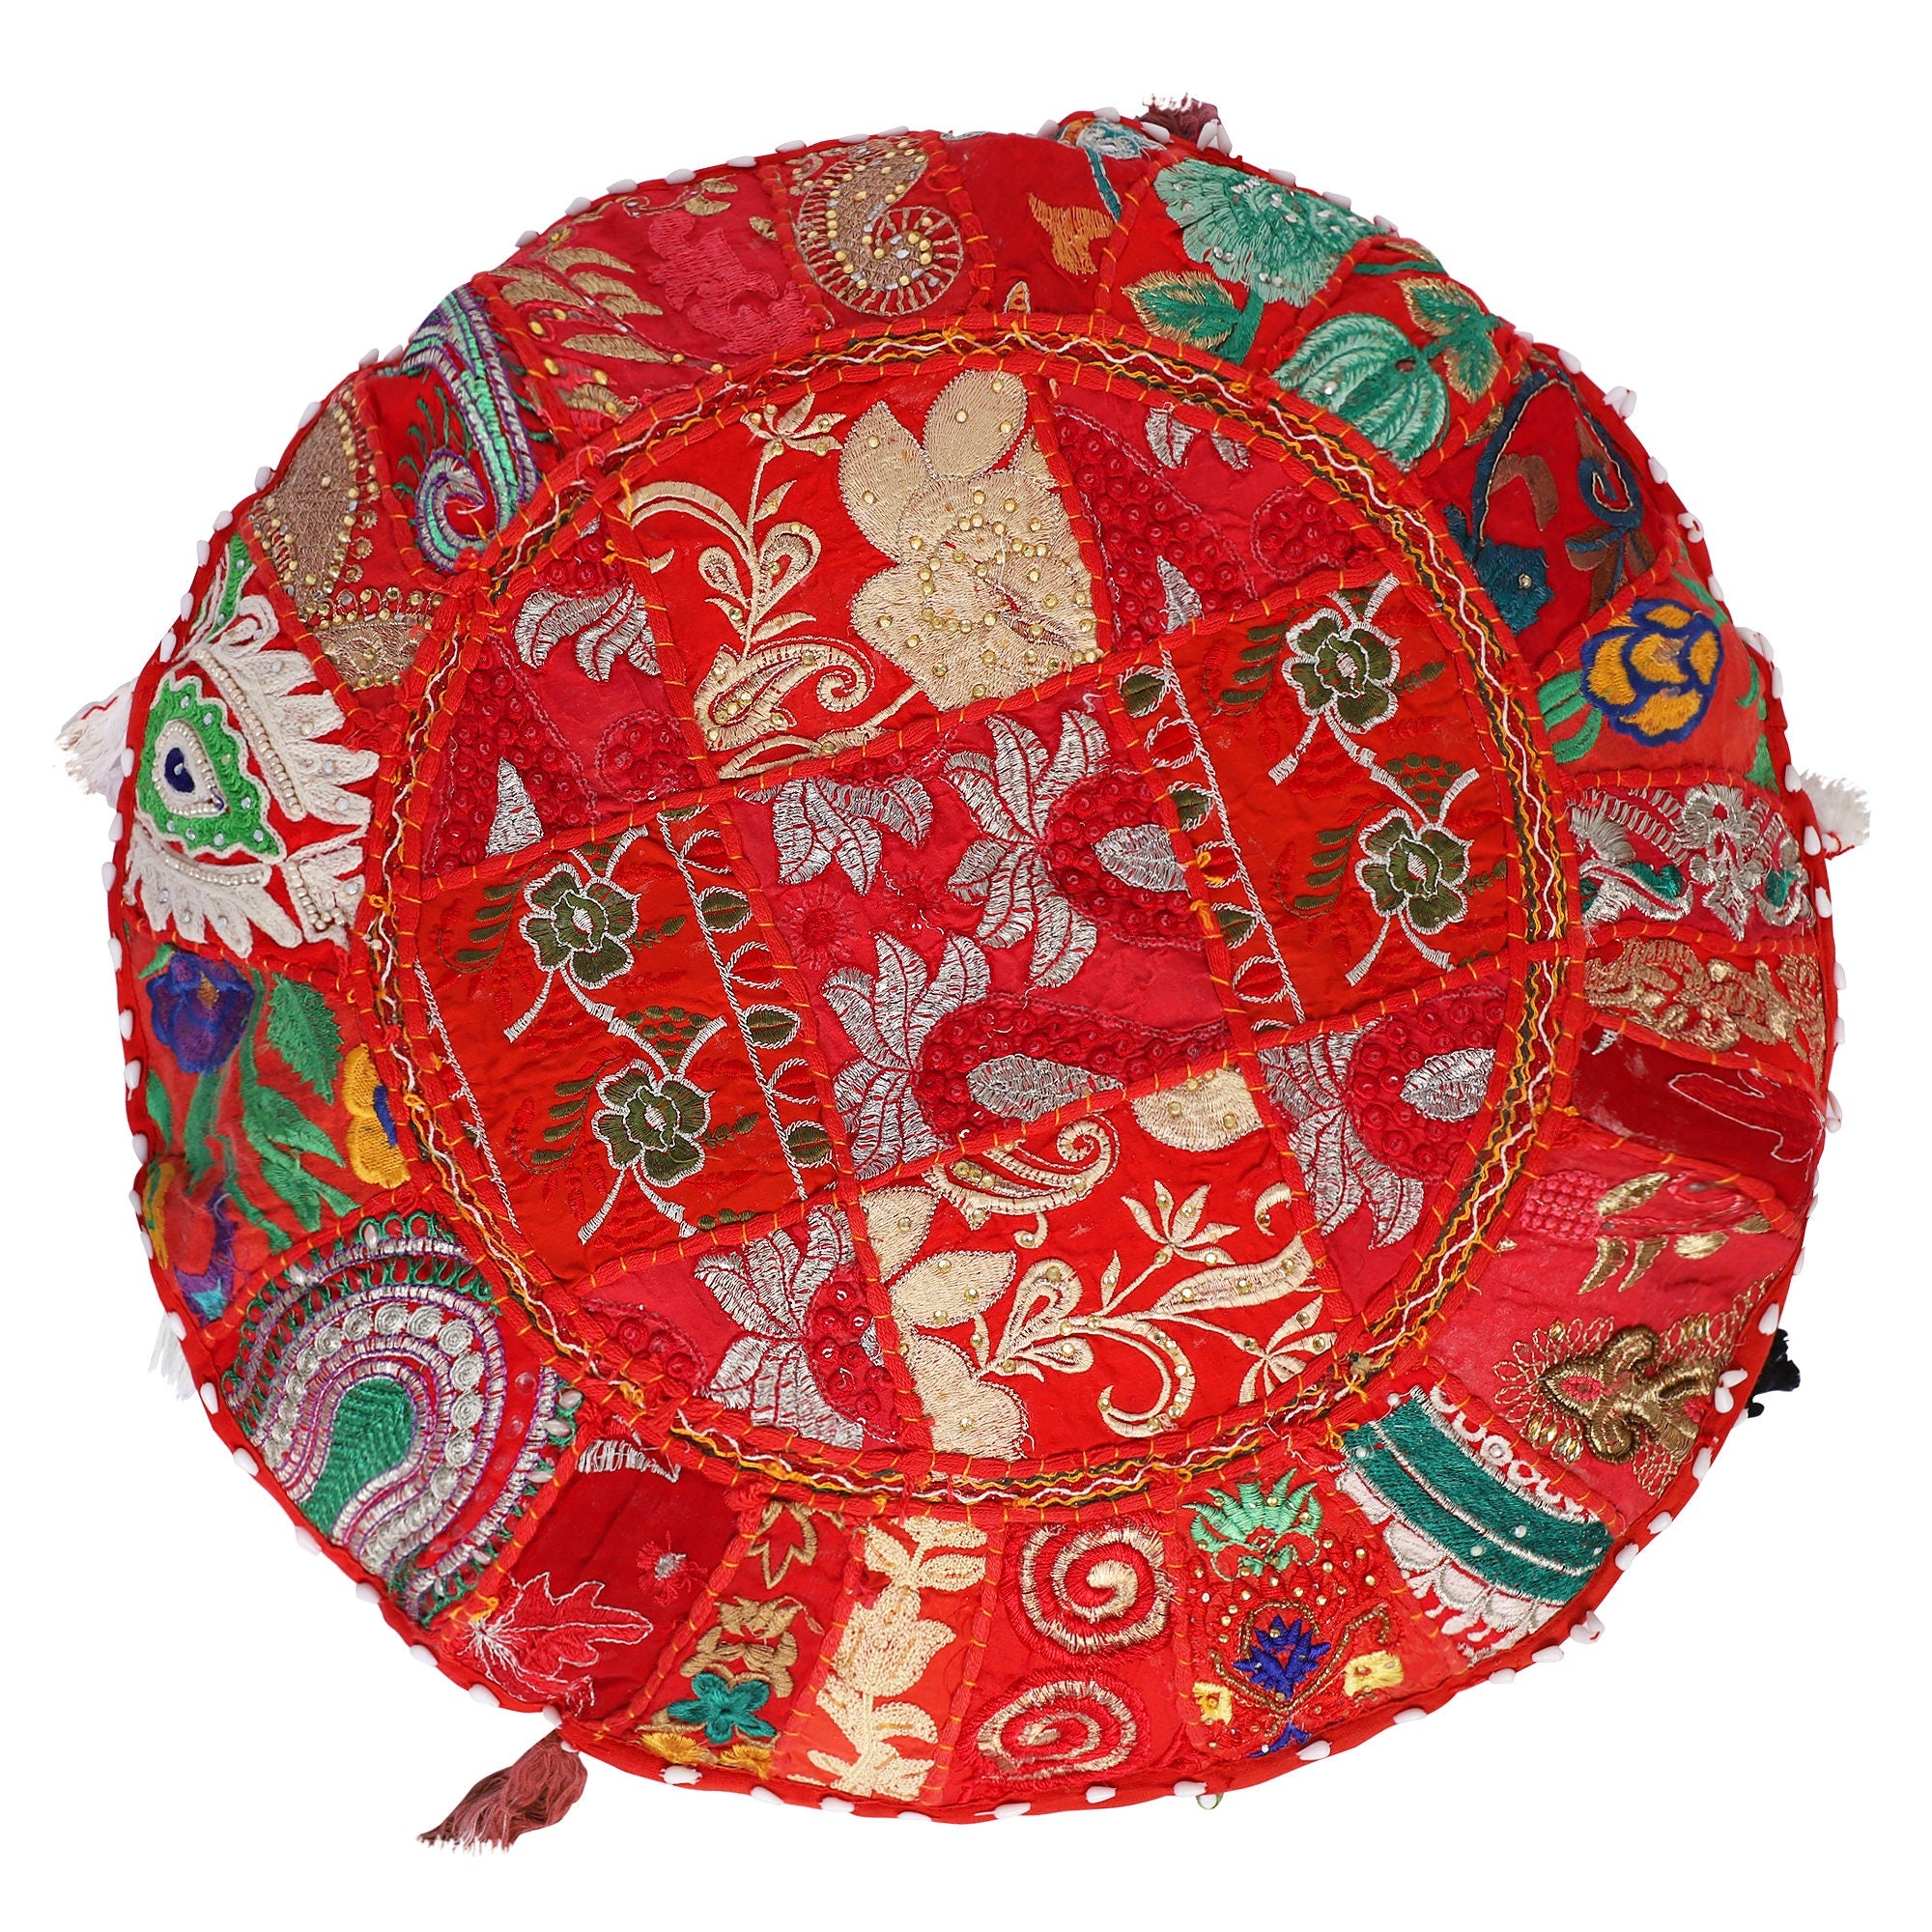 Embroidered Round Cushion Cover, Vintage Wall Hanging -  Red